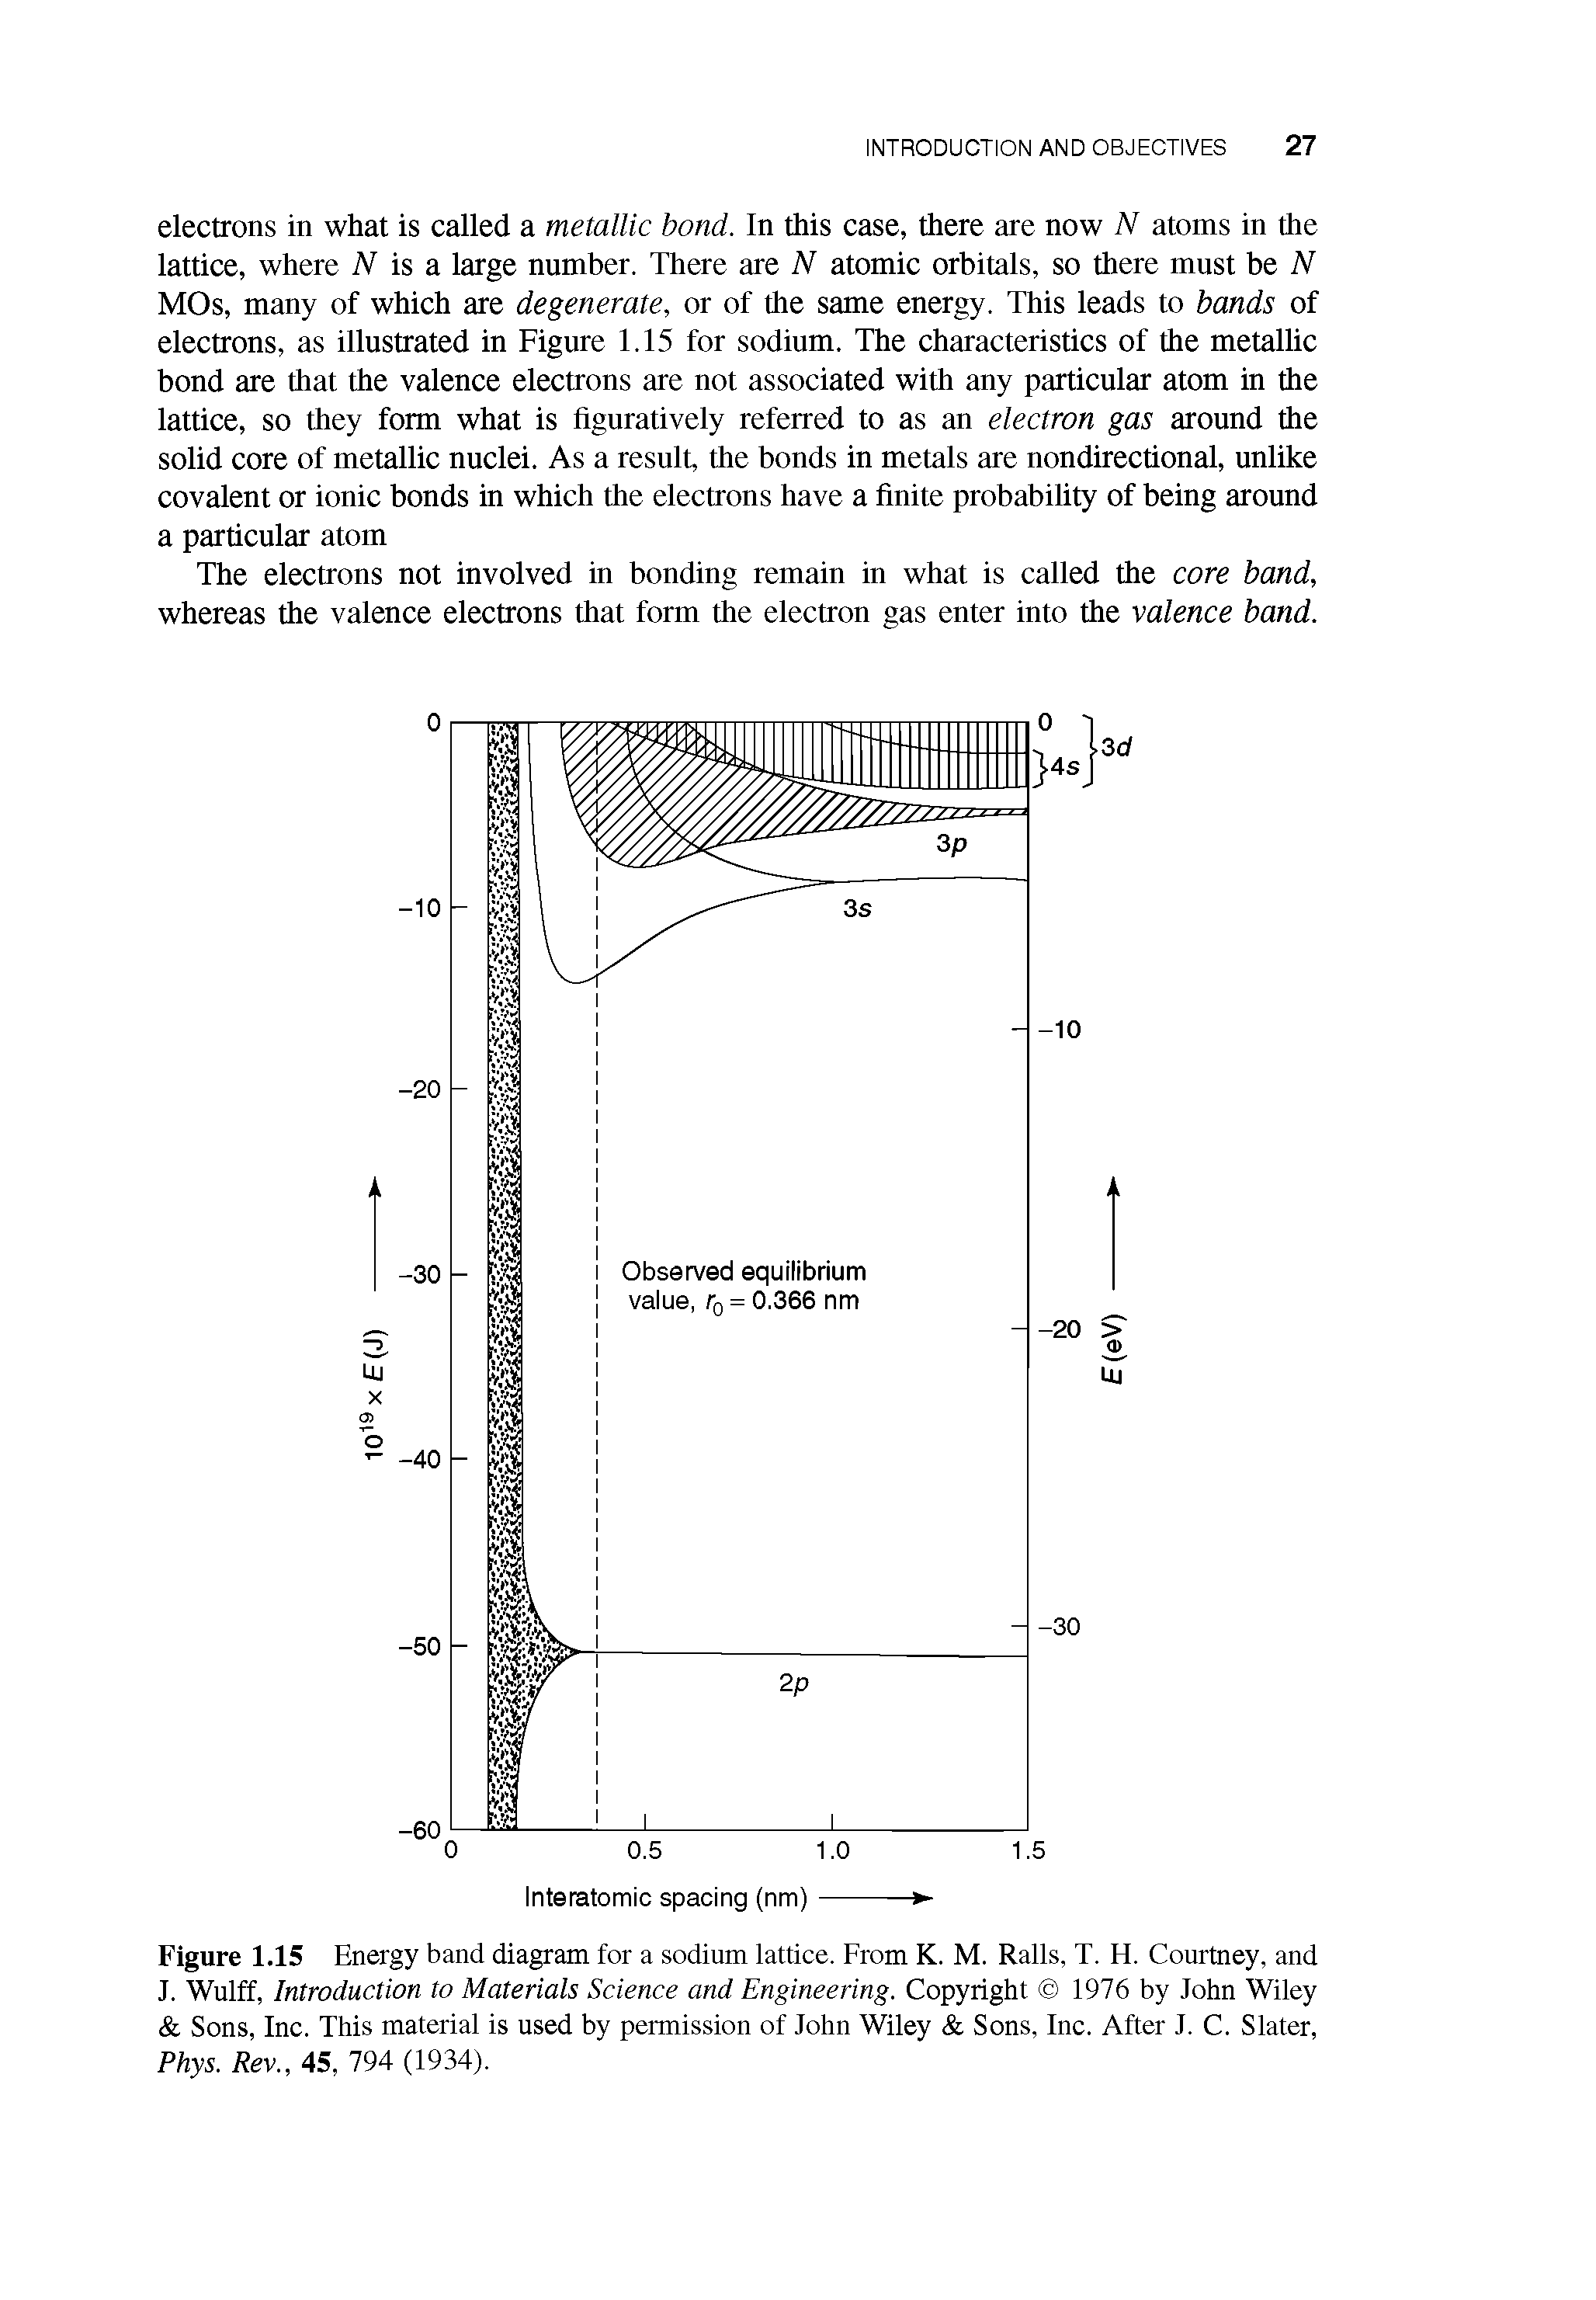 Figure 1.15 Energy band diagram for a sodium lattice. From K. M. Ralls, T. H. Courtney, and J. Wulff, Introduction to Materials Science and Engineering. Copyright 1976 by John Wiley Sons, Inc. This material is used by permission of John Wiley Sons, Inc. After J. C. Slater, Phys. Rev., 45, 794 (1934).